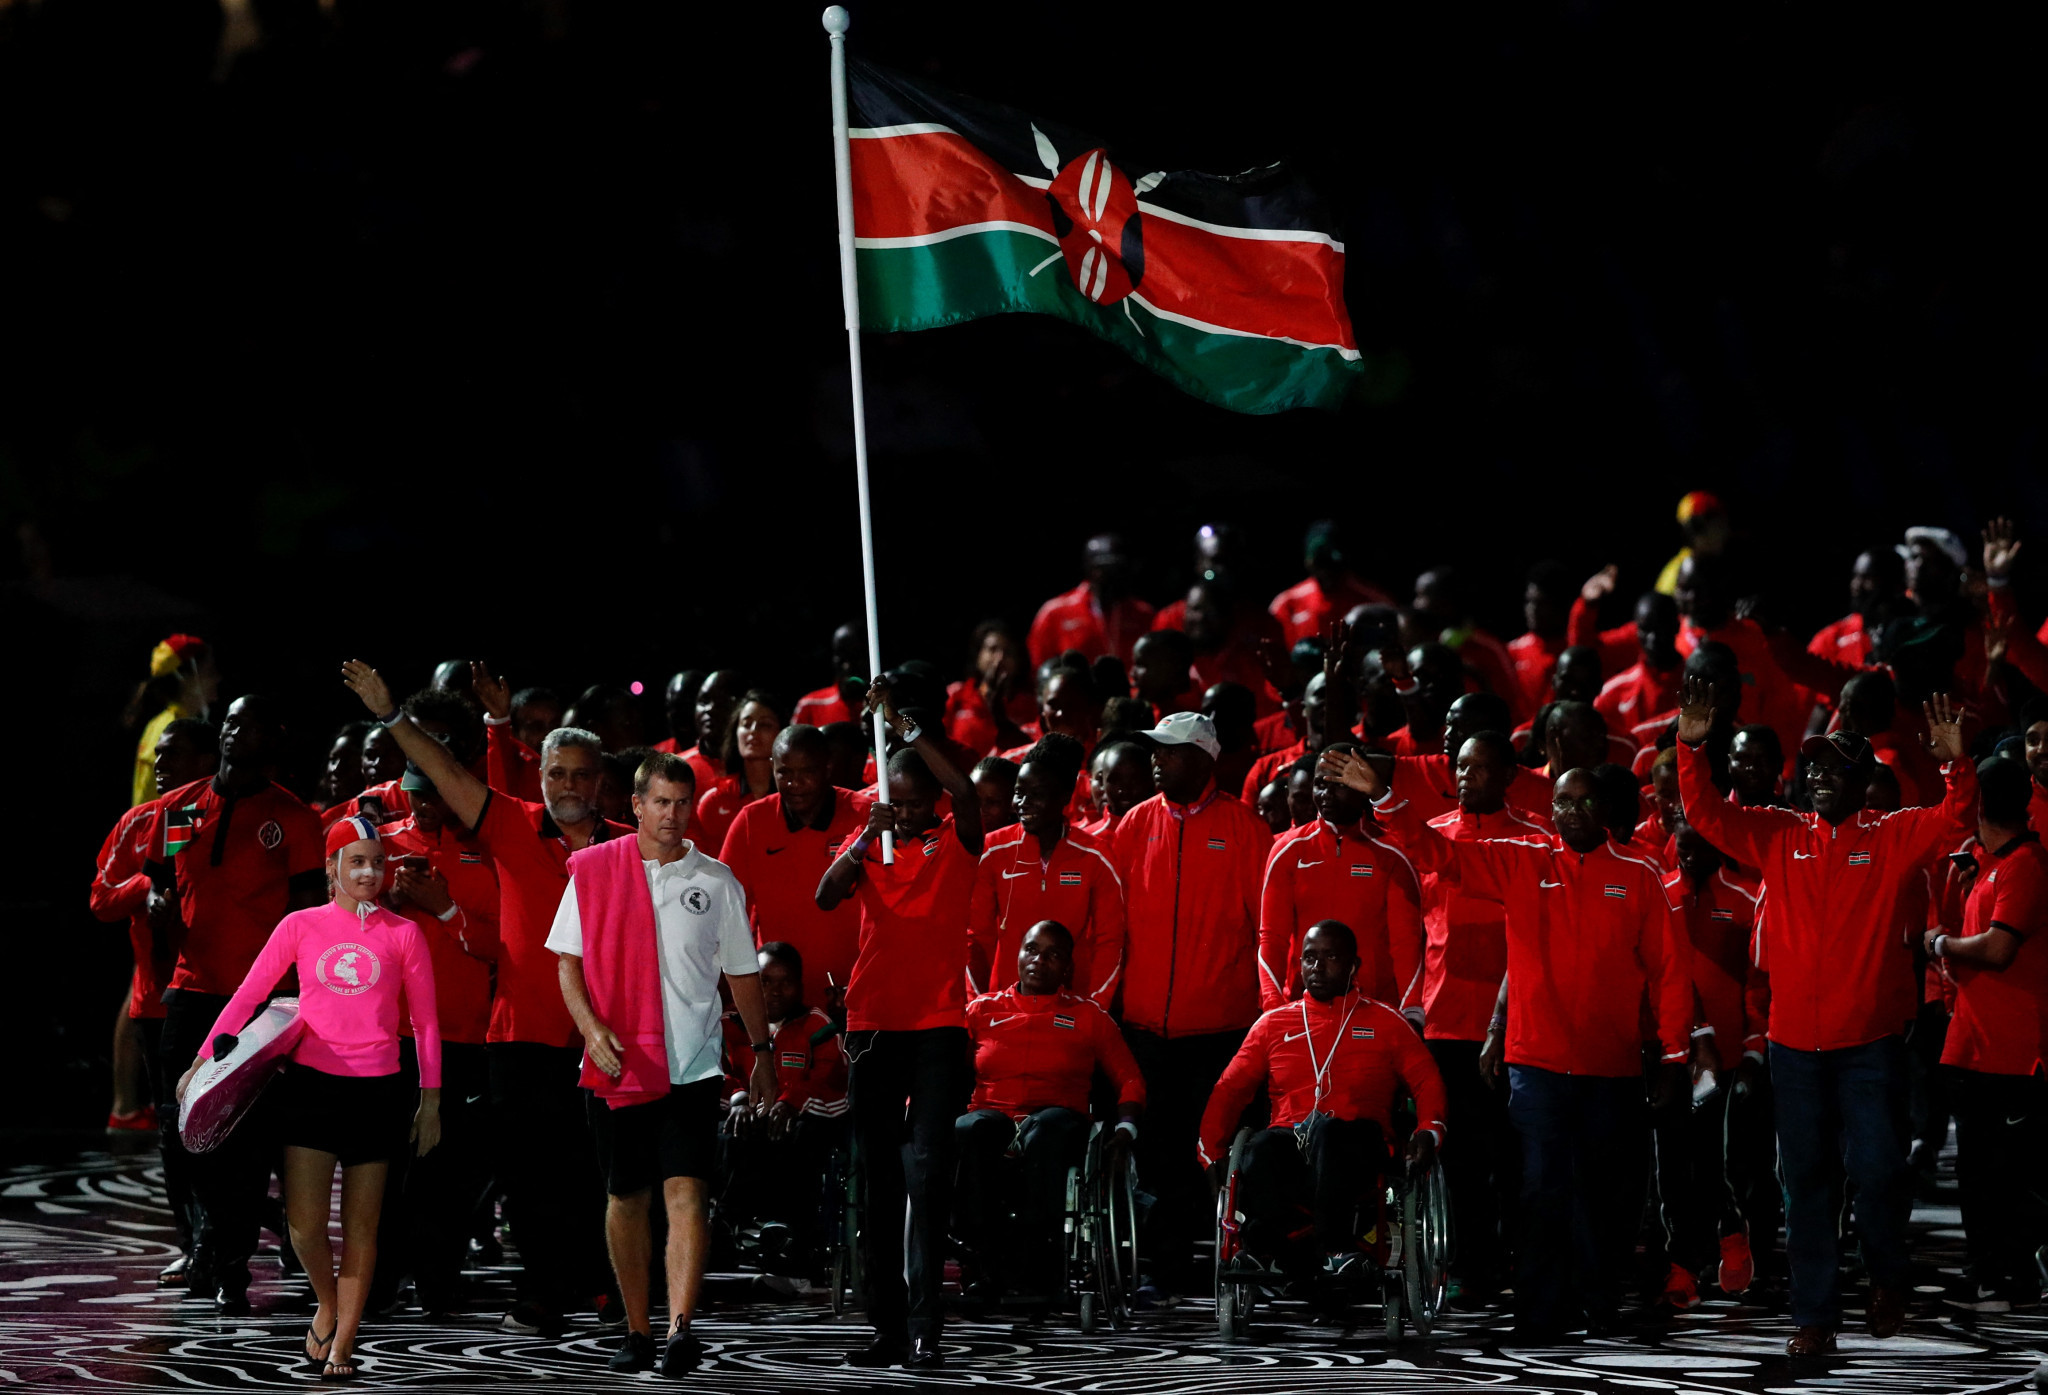 Kenya ranked 14th on the medals table at the Gold Coast 2018 Commonwealth Games ©Getty Images